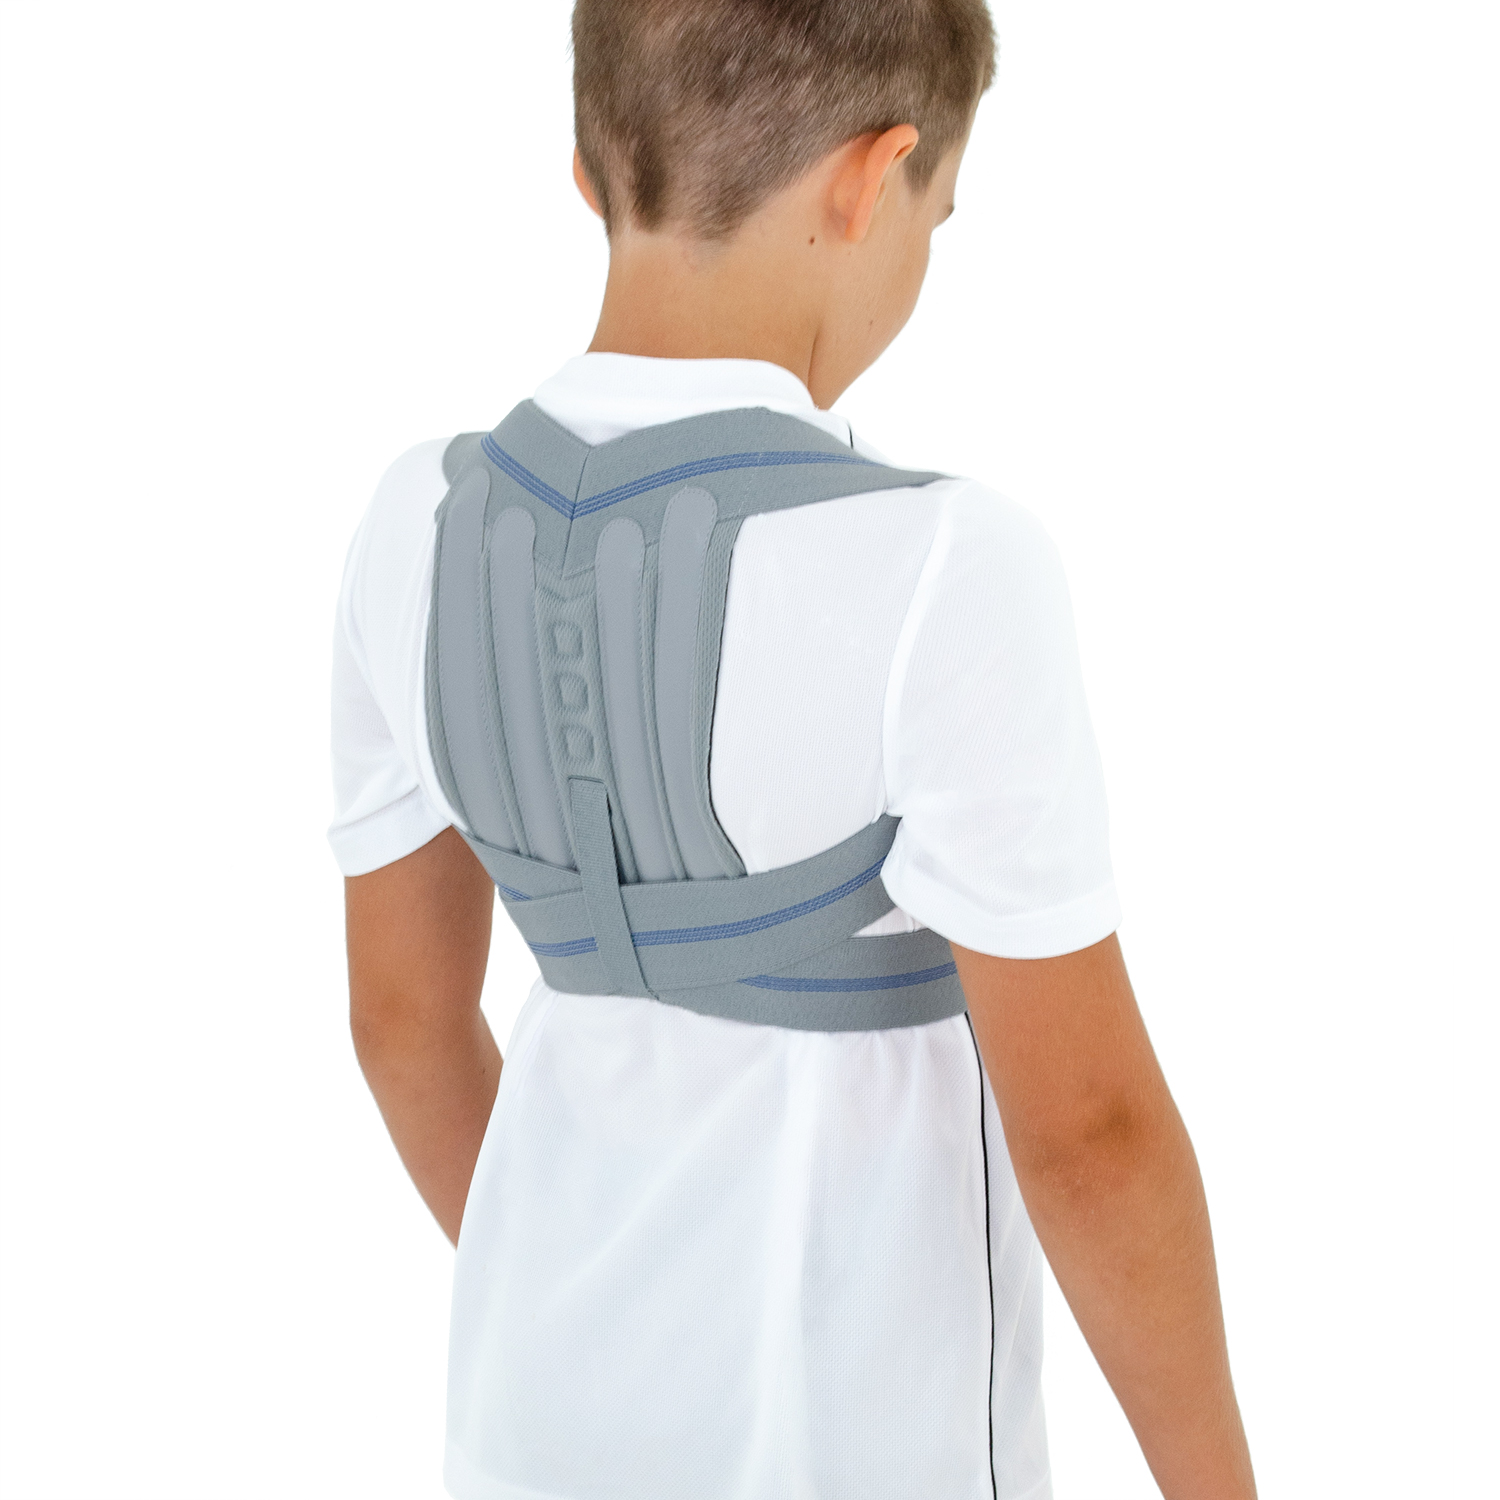 What Is a Posture Corrector And What Kind Of Braces Are There? How